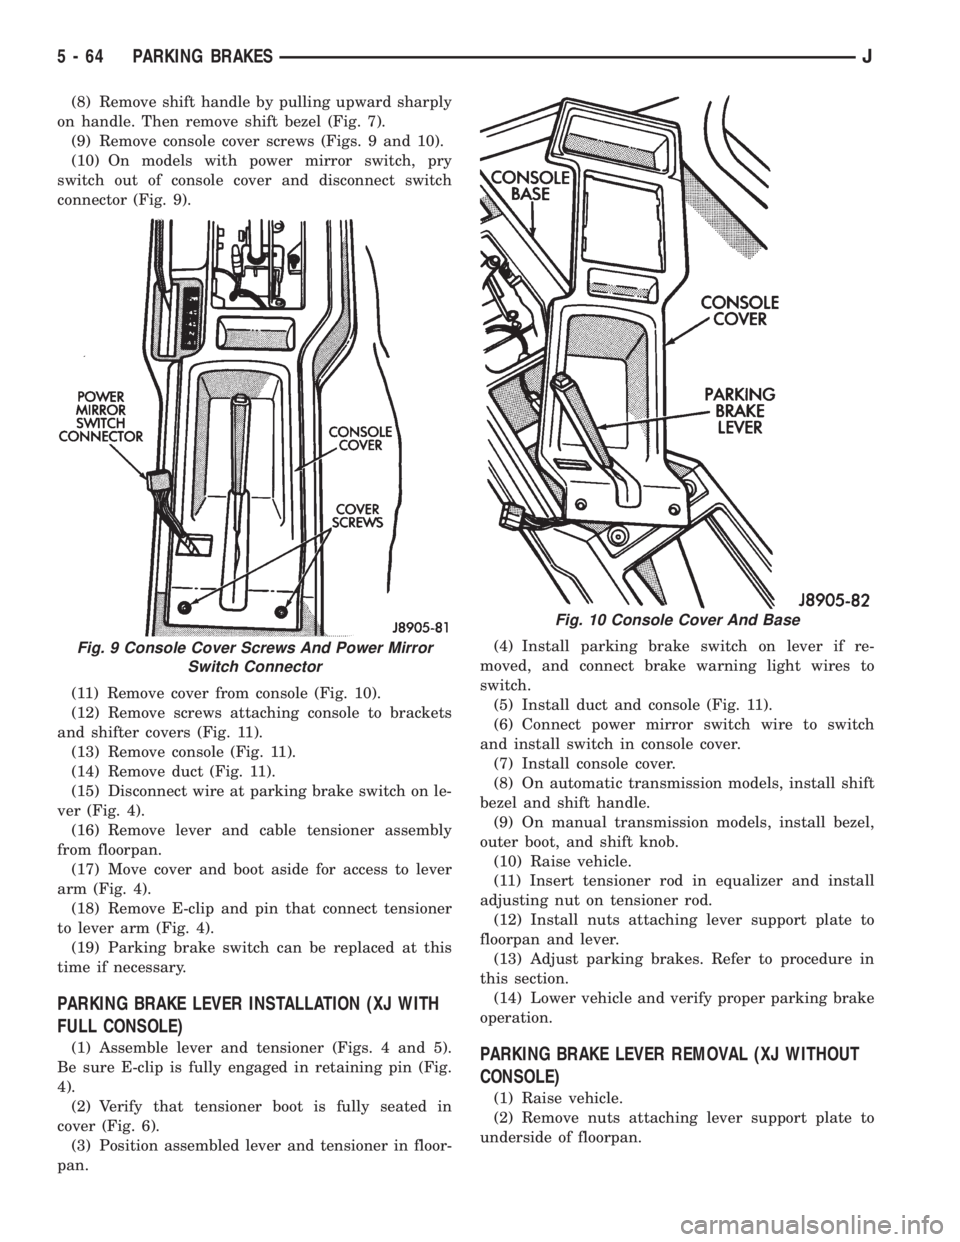 JEEP XJ 1995  Service And Repair Manual (8) Remove shift handle by pulling upward sharply
on handle. Then remove shift bezel (Fig. 7).
(9) Remove console cover screws (Figs. 9 and 10).
(10) On models with power mirror switch, pry
switch out